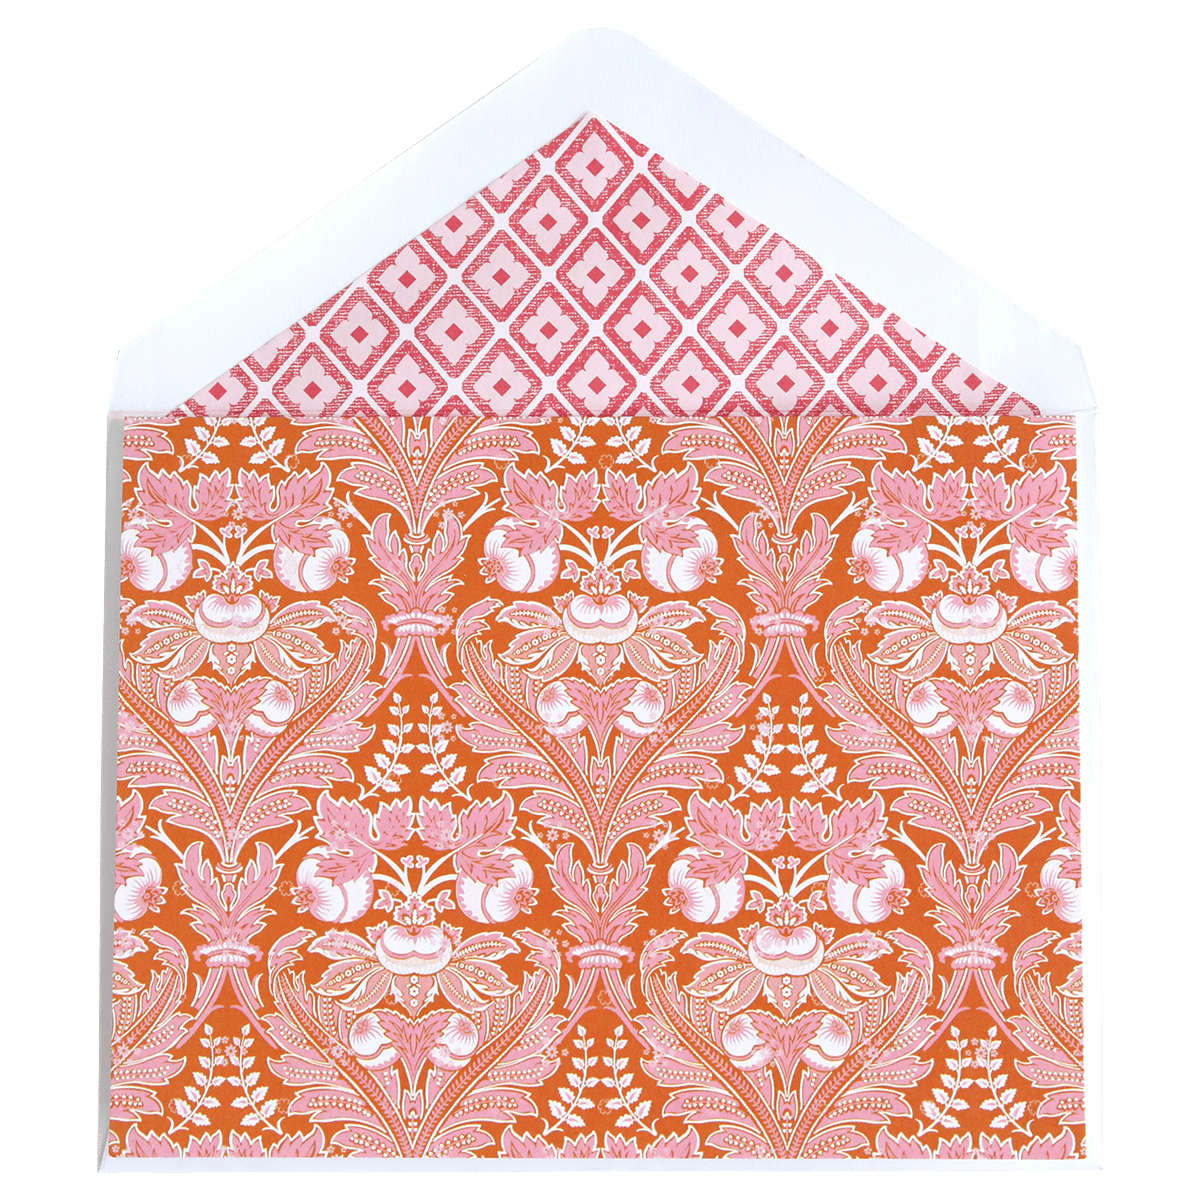 an orange and white envelope with a red and white pattern.